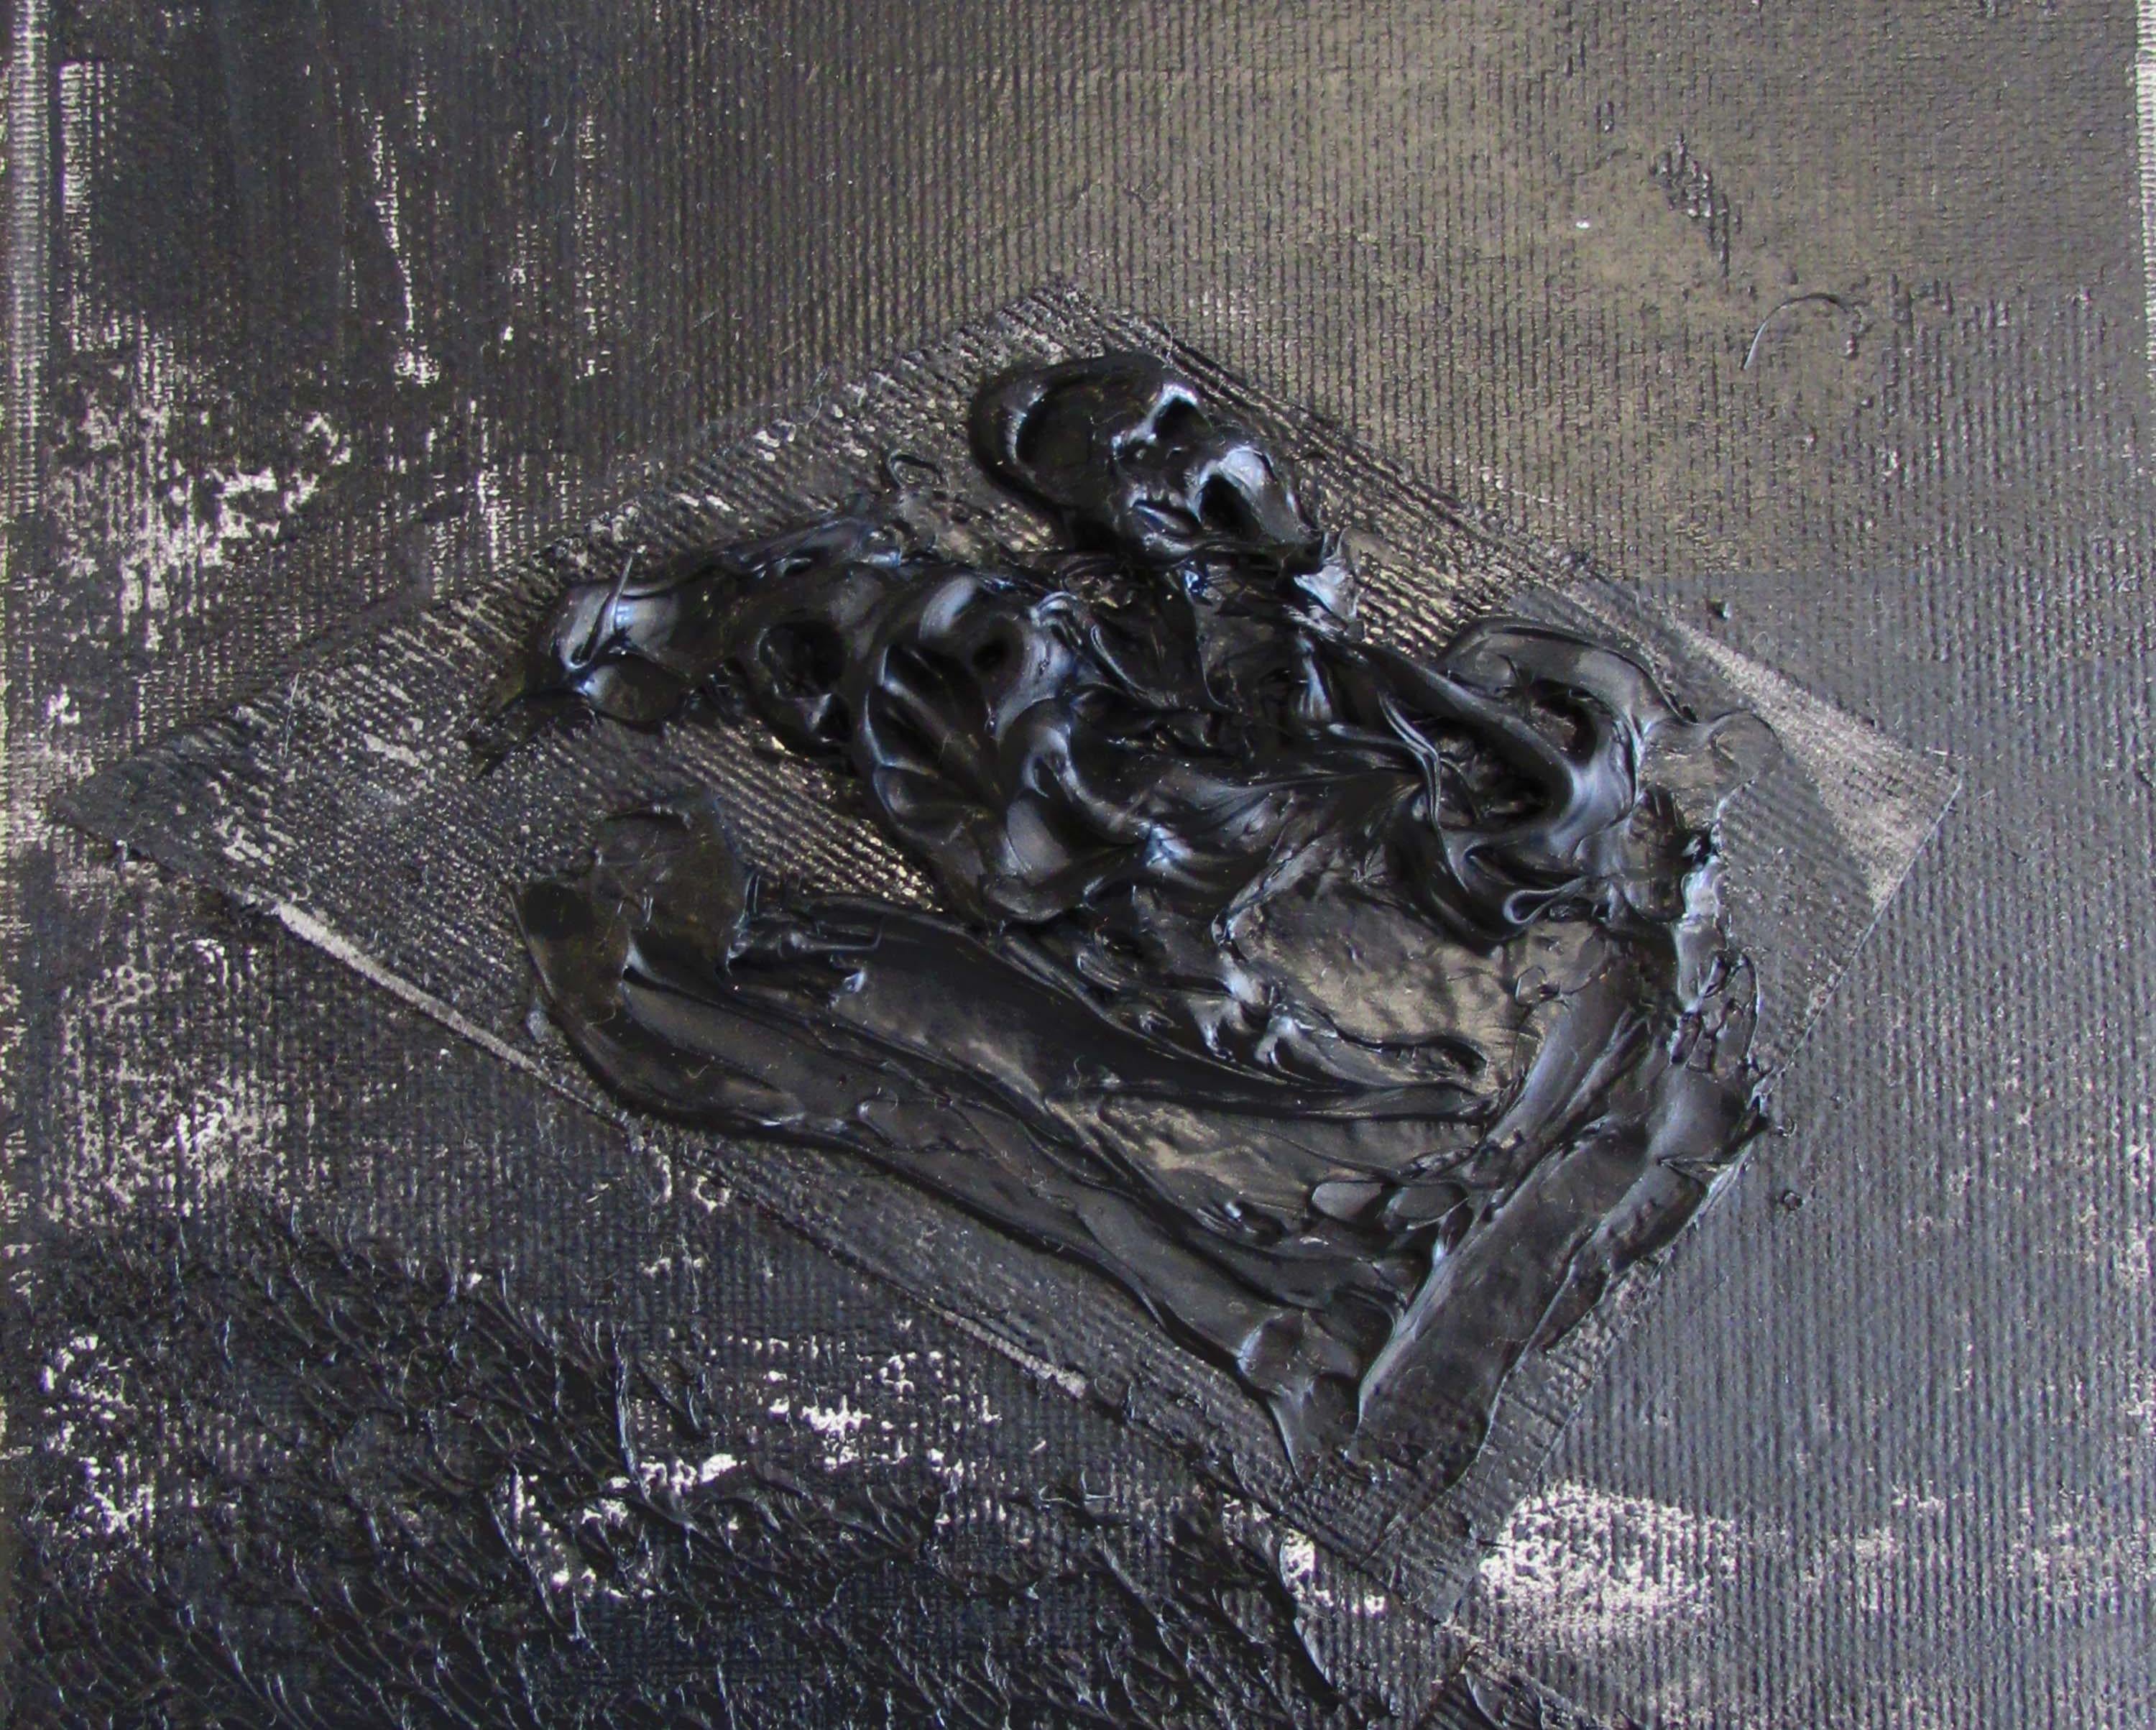 Untitled 02 [Dissecting the Unknown 02] - Contemporary, Black, Monochrome - Painting by Zsolt Berszán